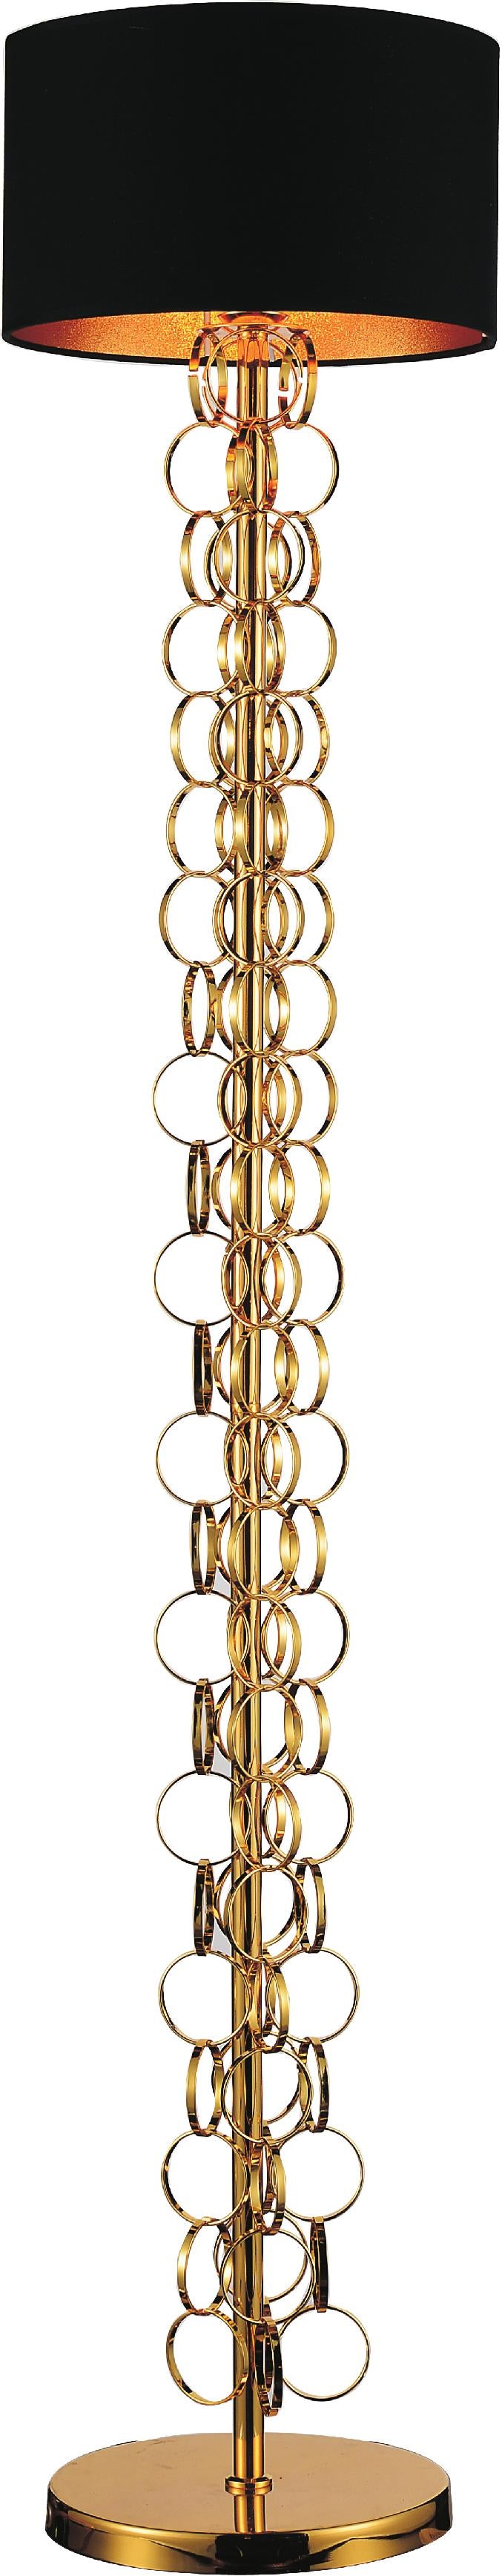 1 Light Floor Lamp with Gold finish